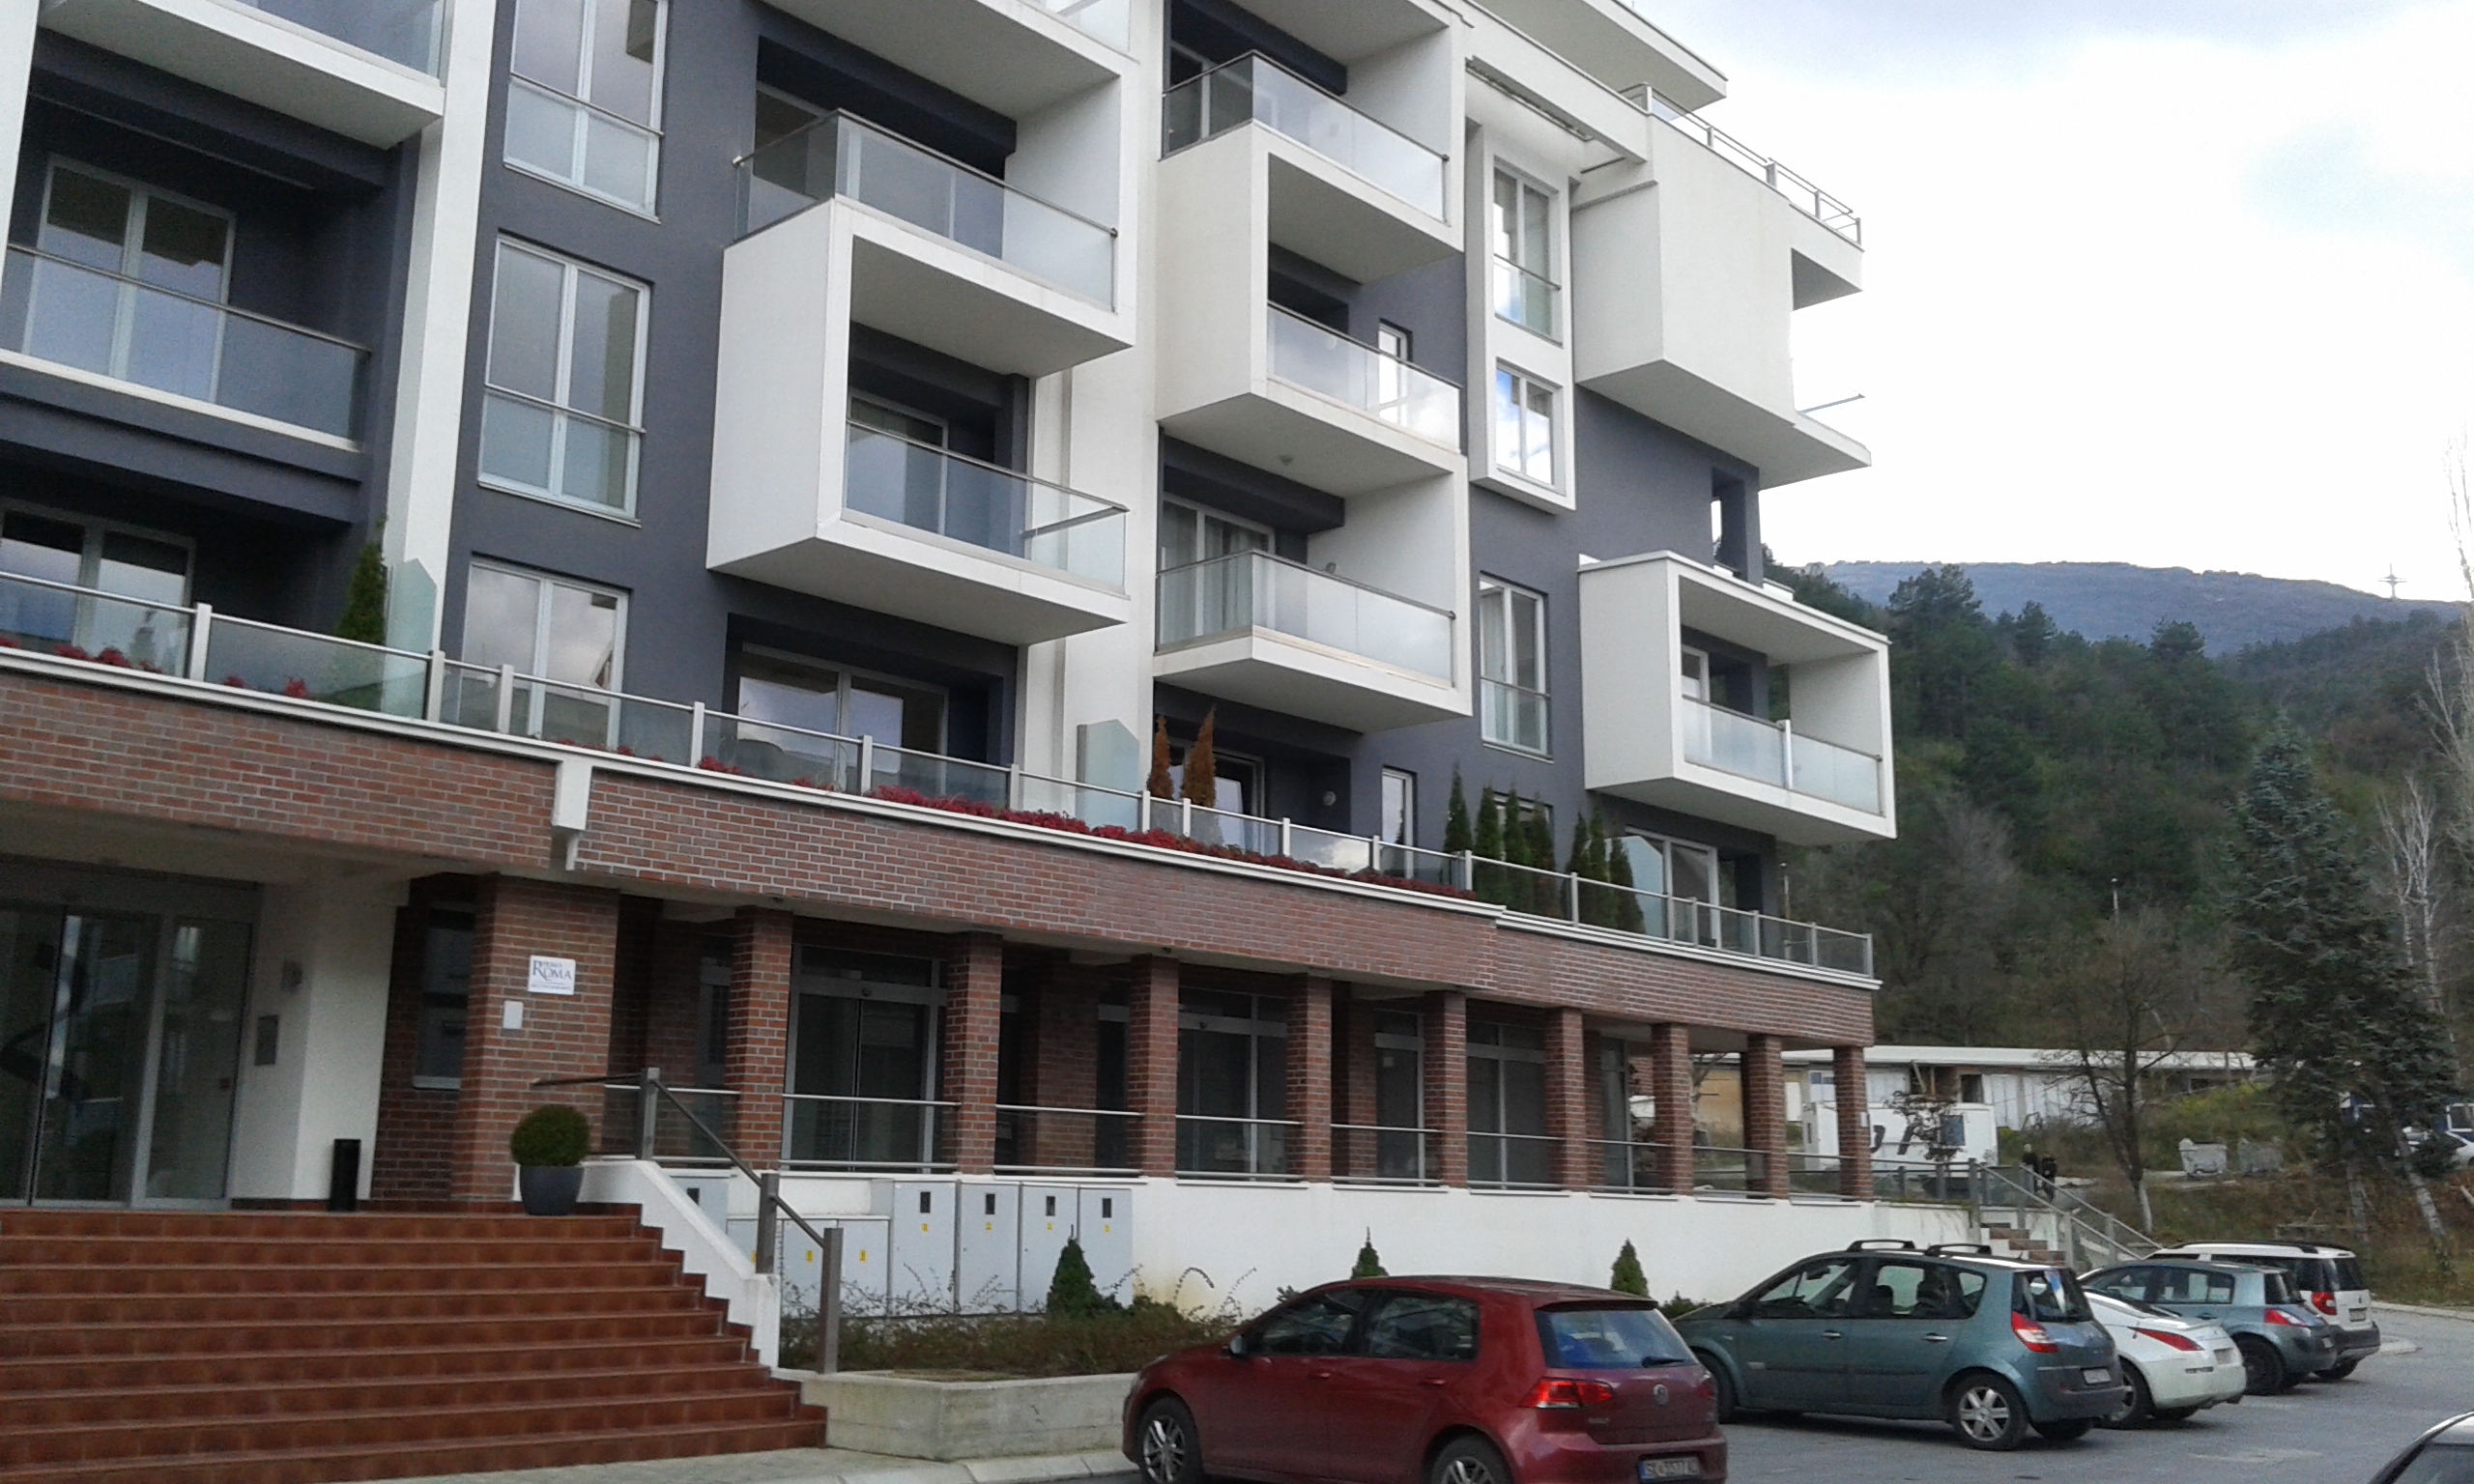 For rent a new exclusive apartment Vodno in Soravia